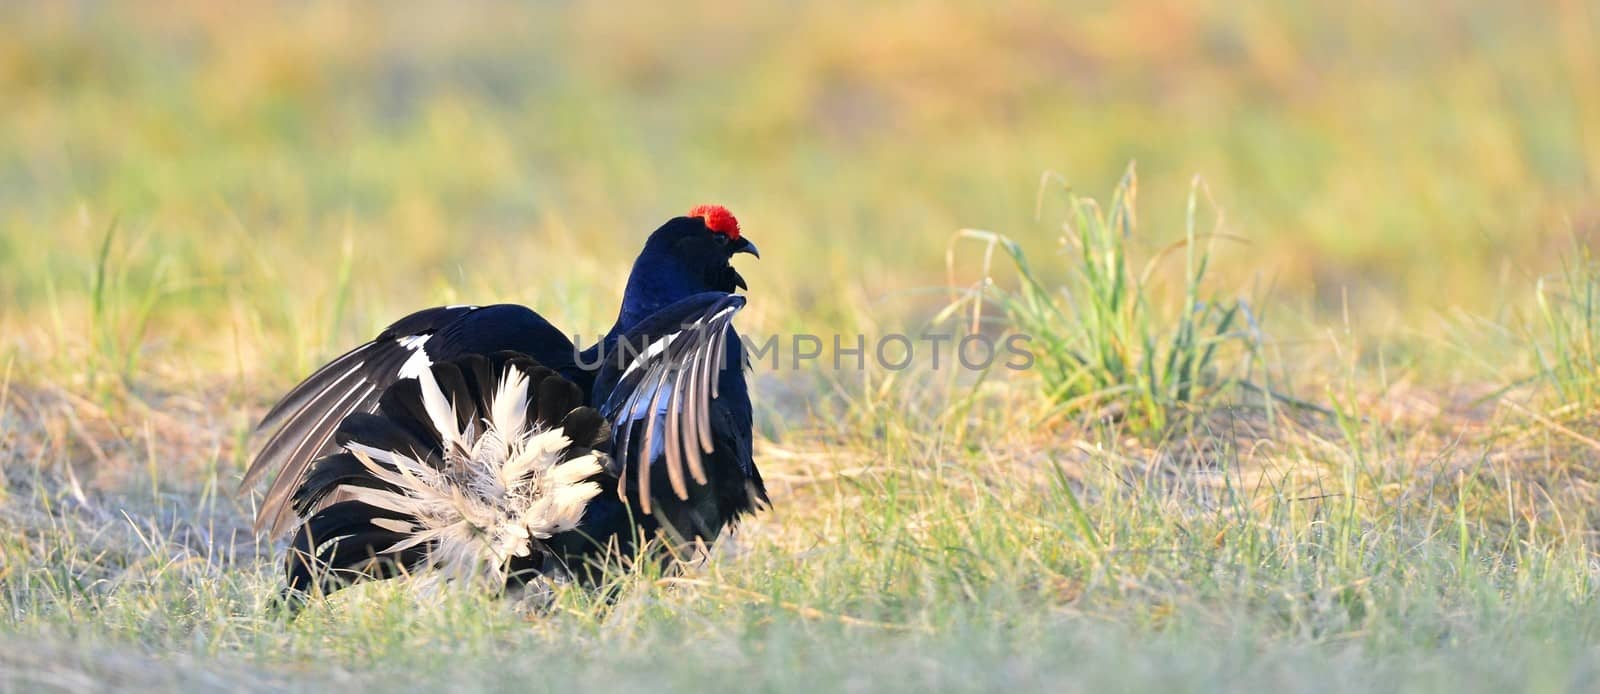 Lekking  black grouse by SURZ